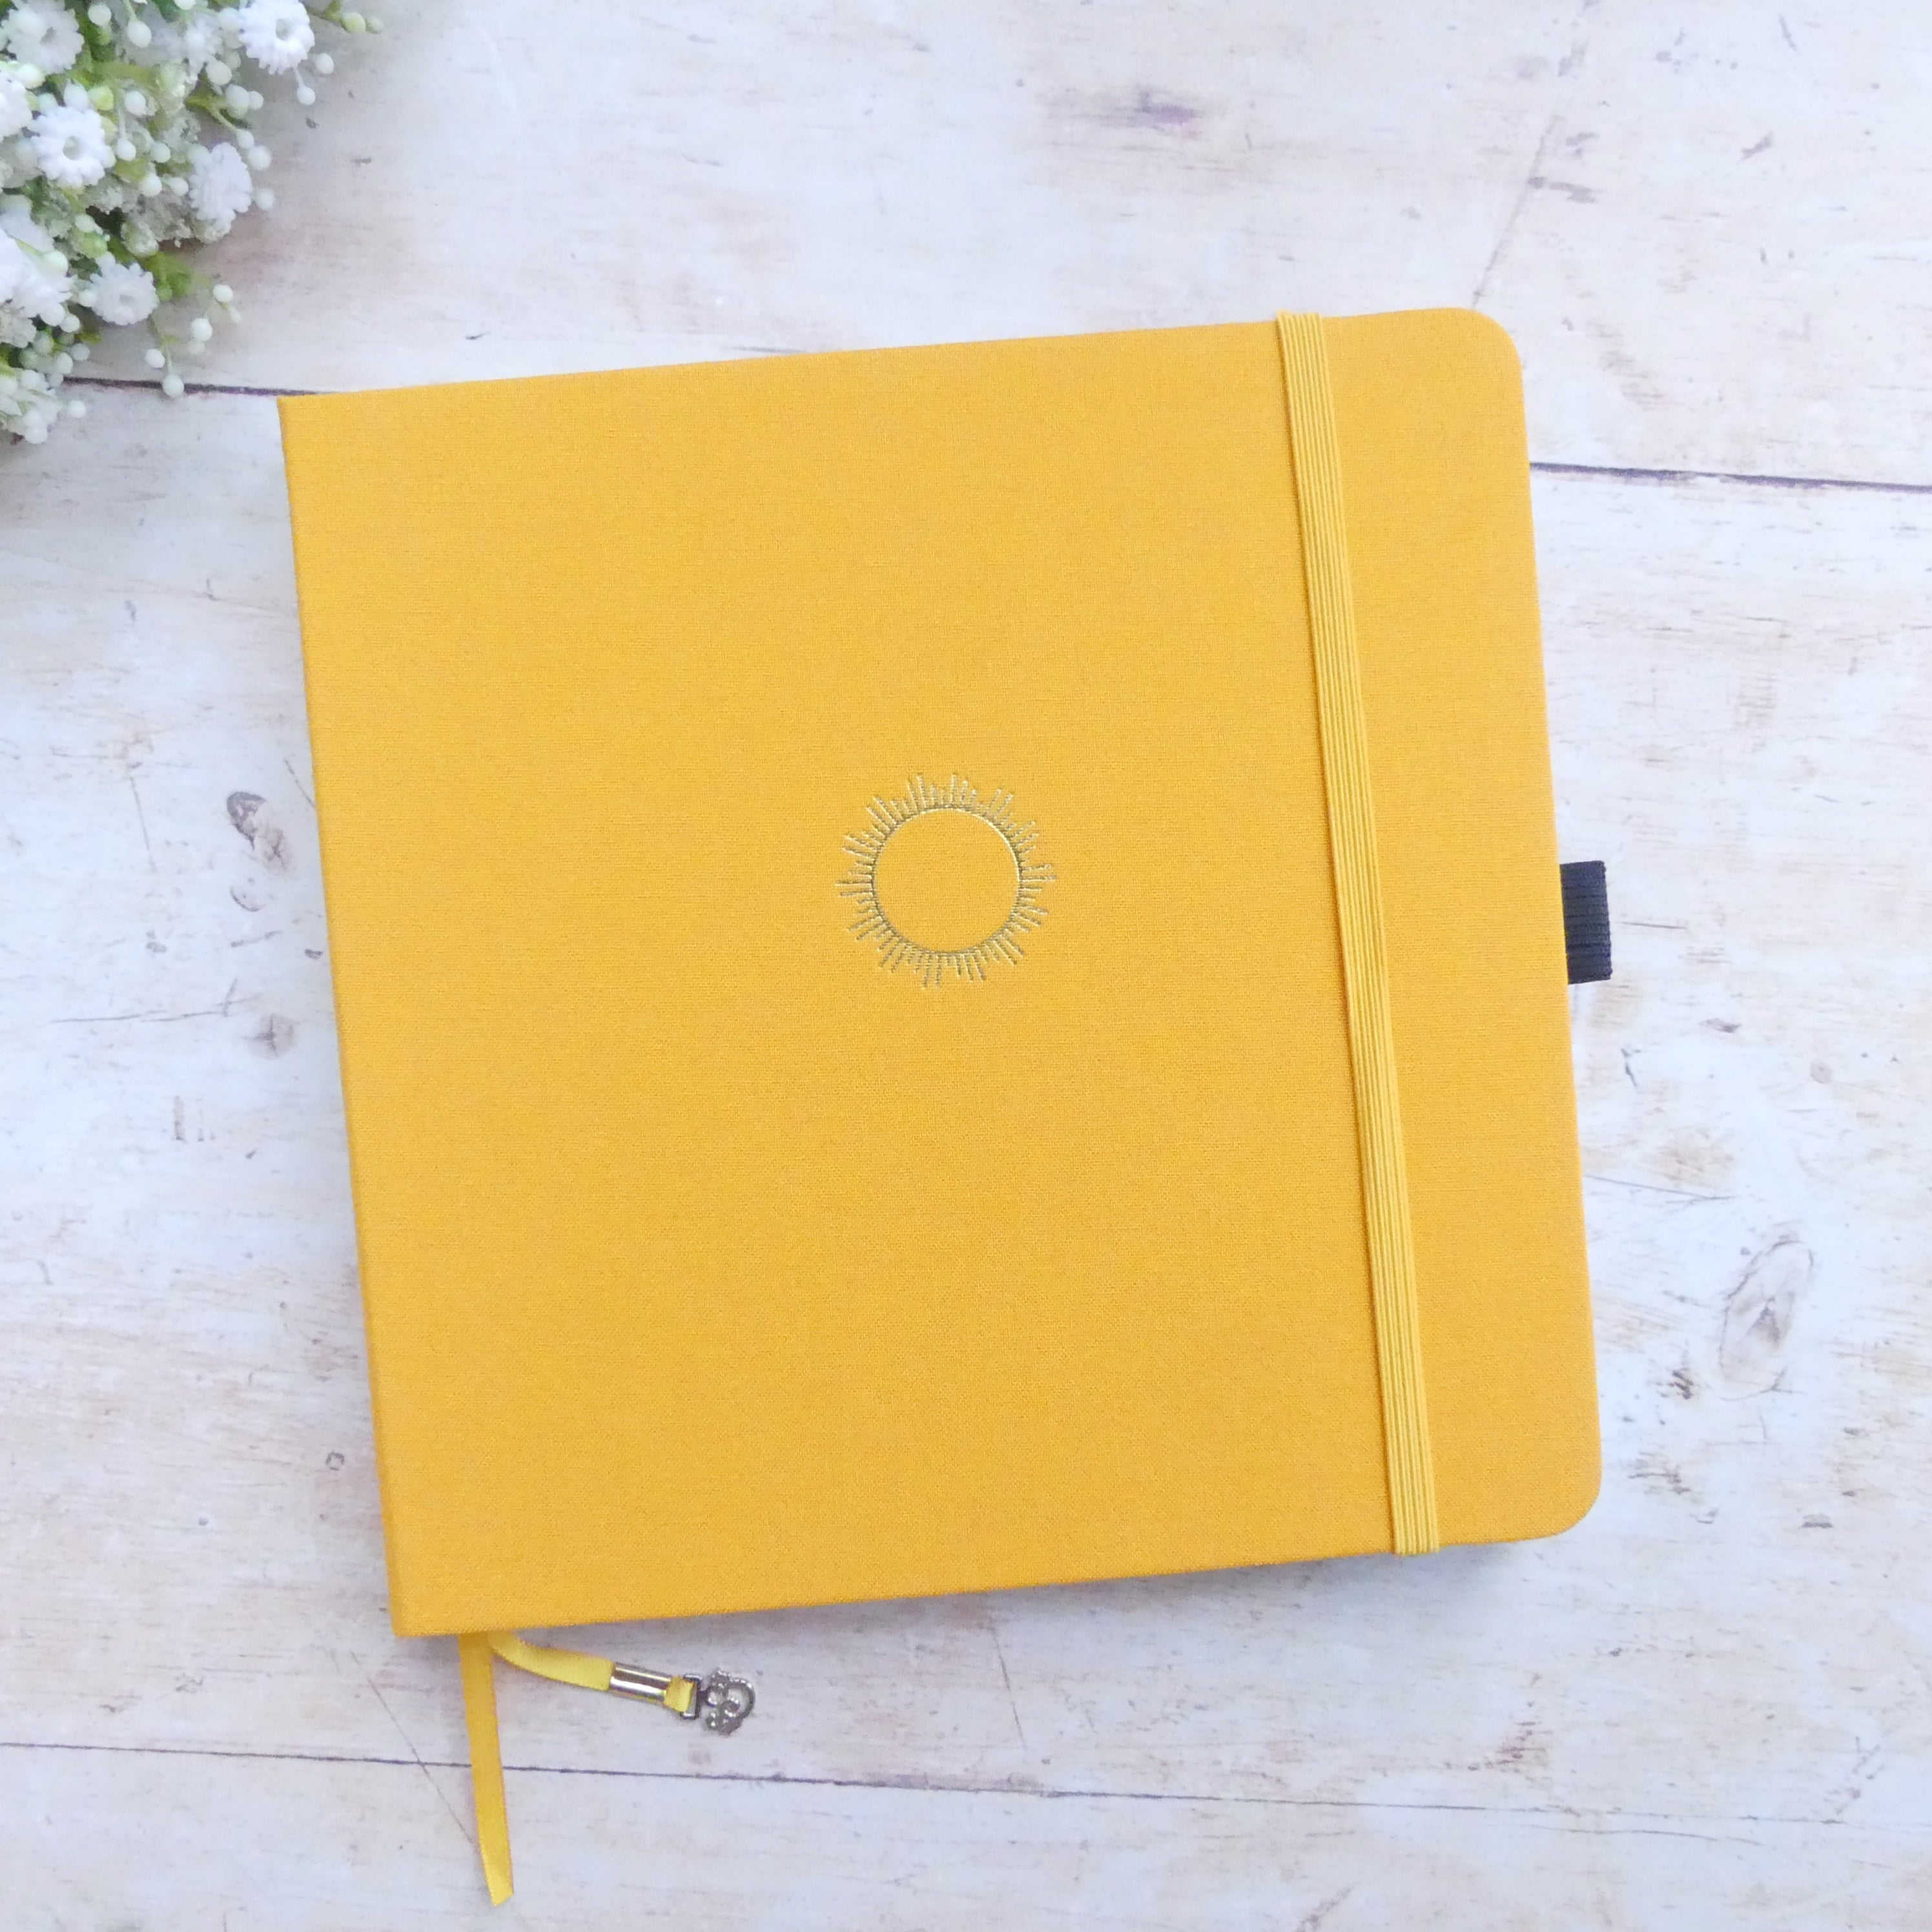 8x8 yellow journal with sun icon